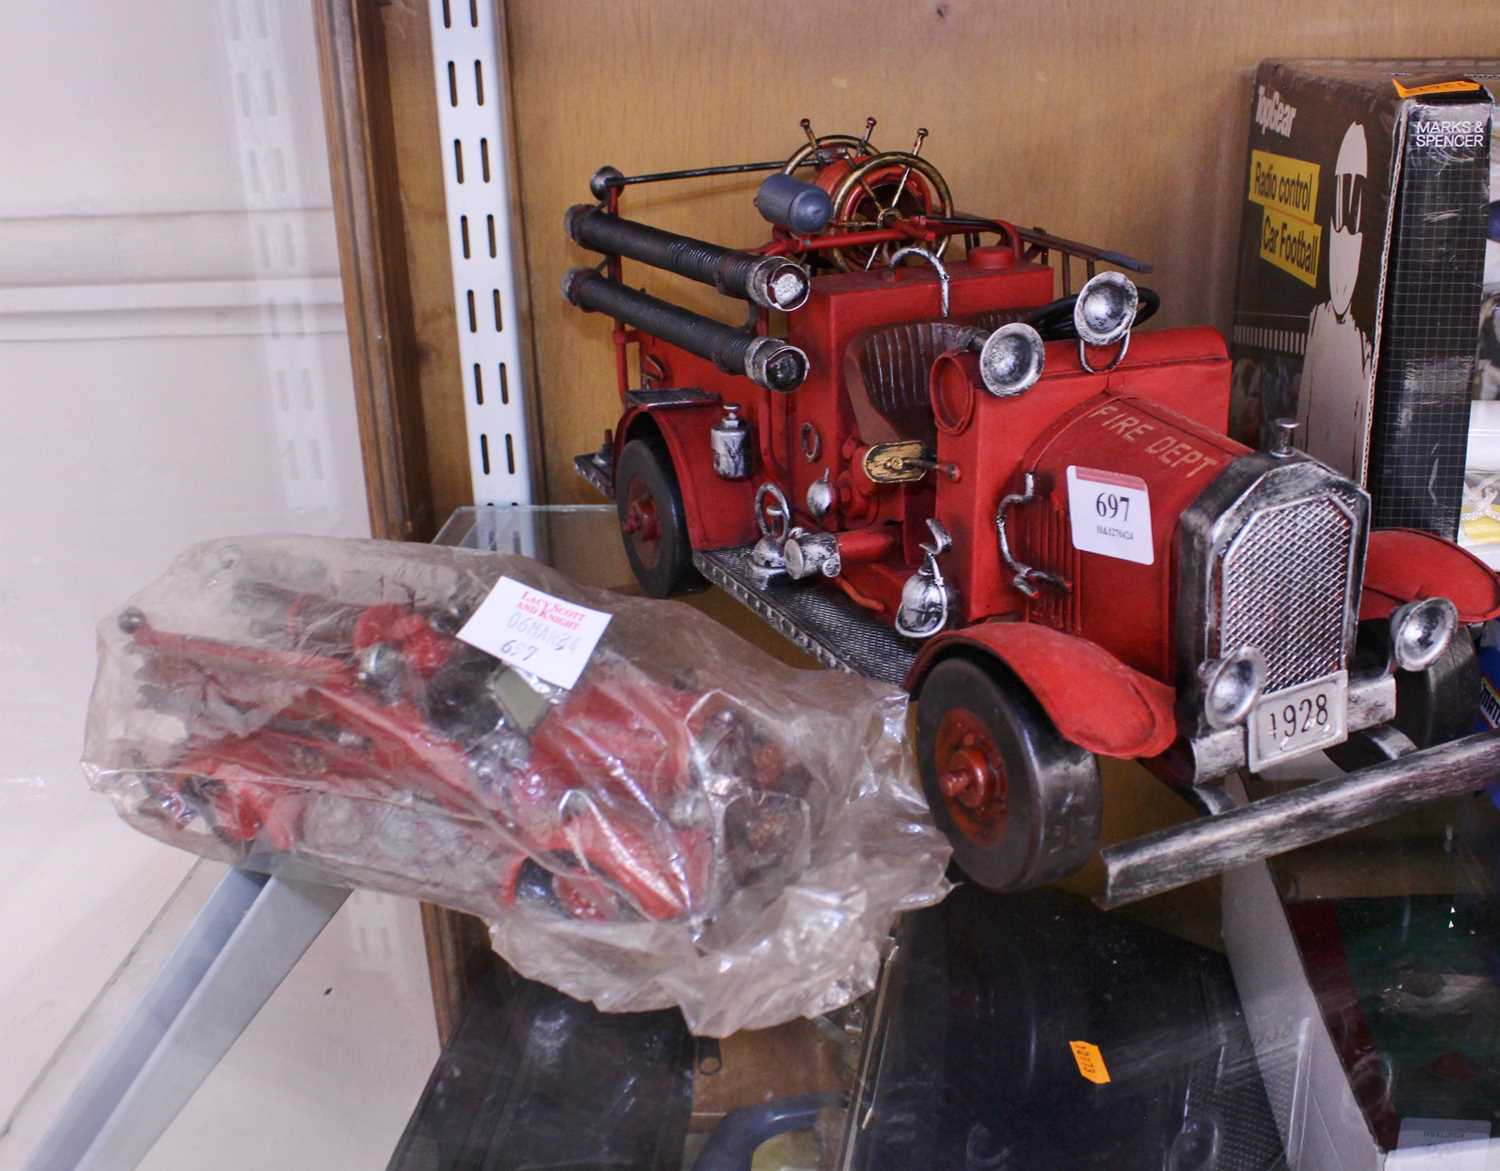 A Popular Imports model of a Fire Department engine together with one other example